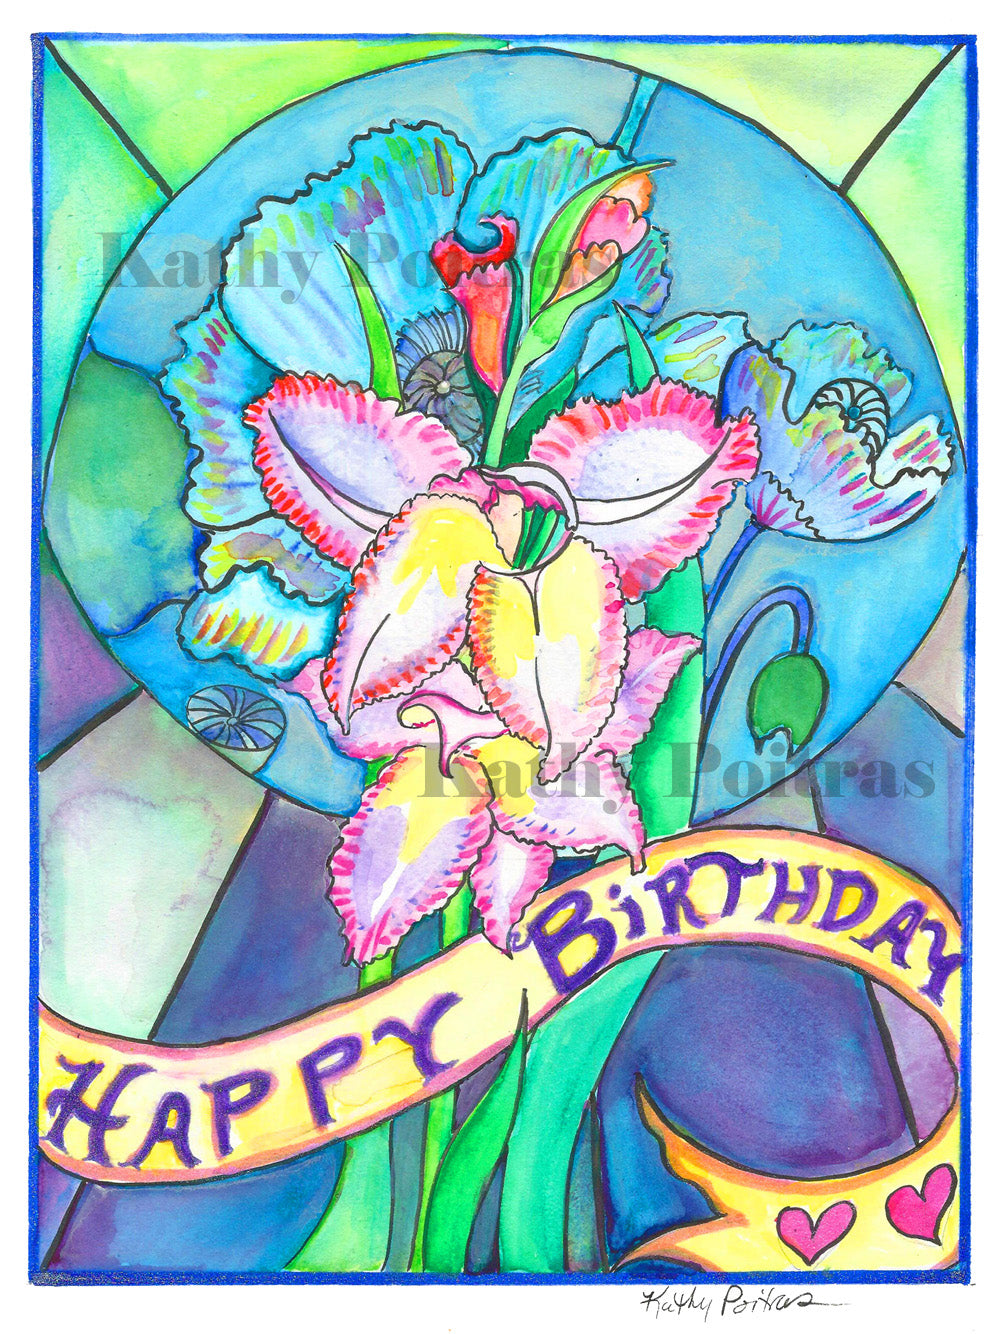 Hand made birthday card, in the naïve folk art style of Kathy Poitras. Inspired by the August birth flower of the month Gladiolus. Gladiolus with a stain glass inspired background. A celebratory swirly ribbon that says "Happy Birthday" across the bottom. Lovingly hand embellished by the artist. 